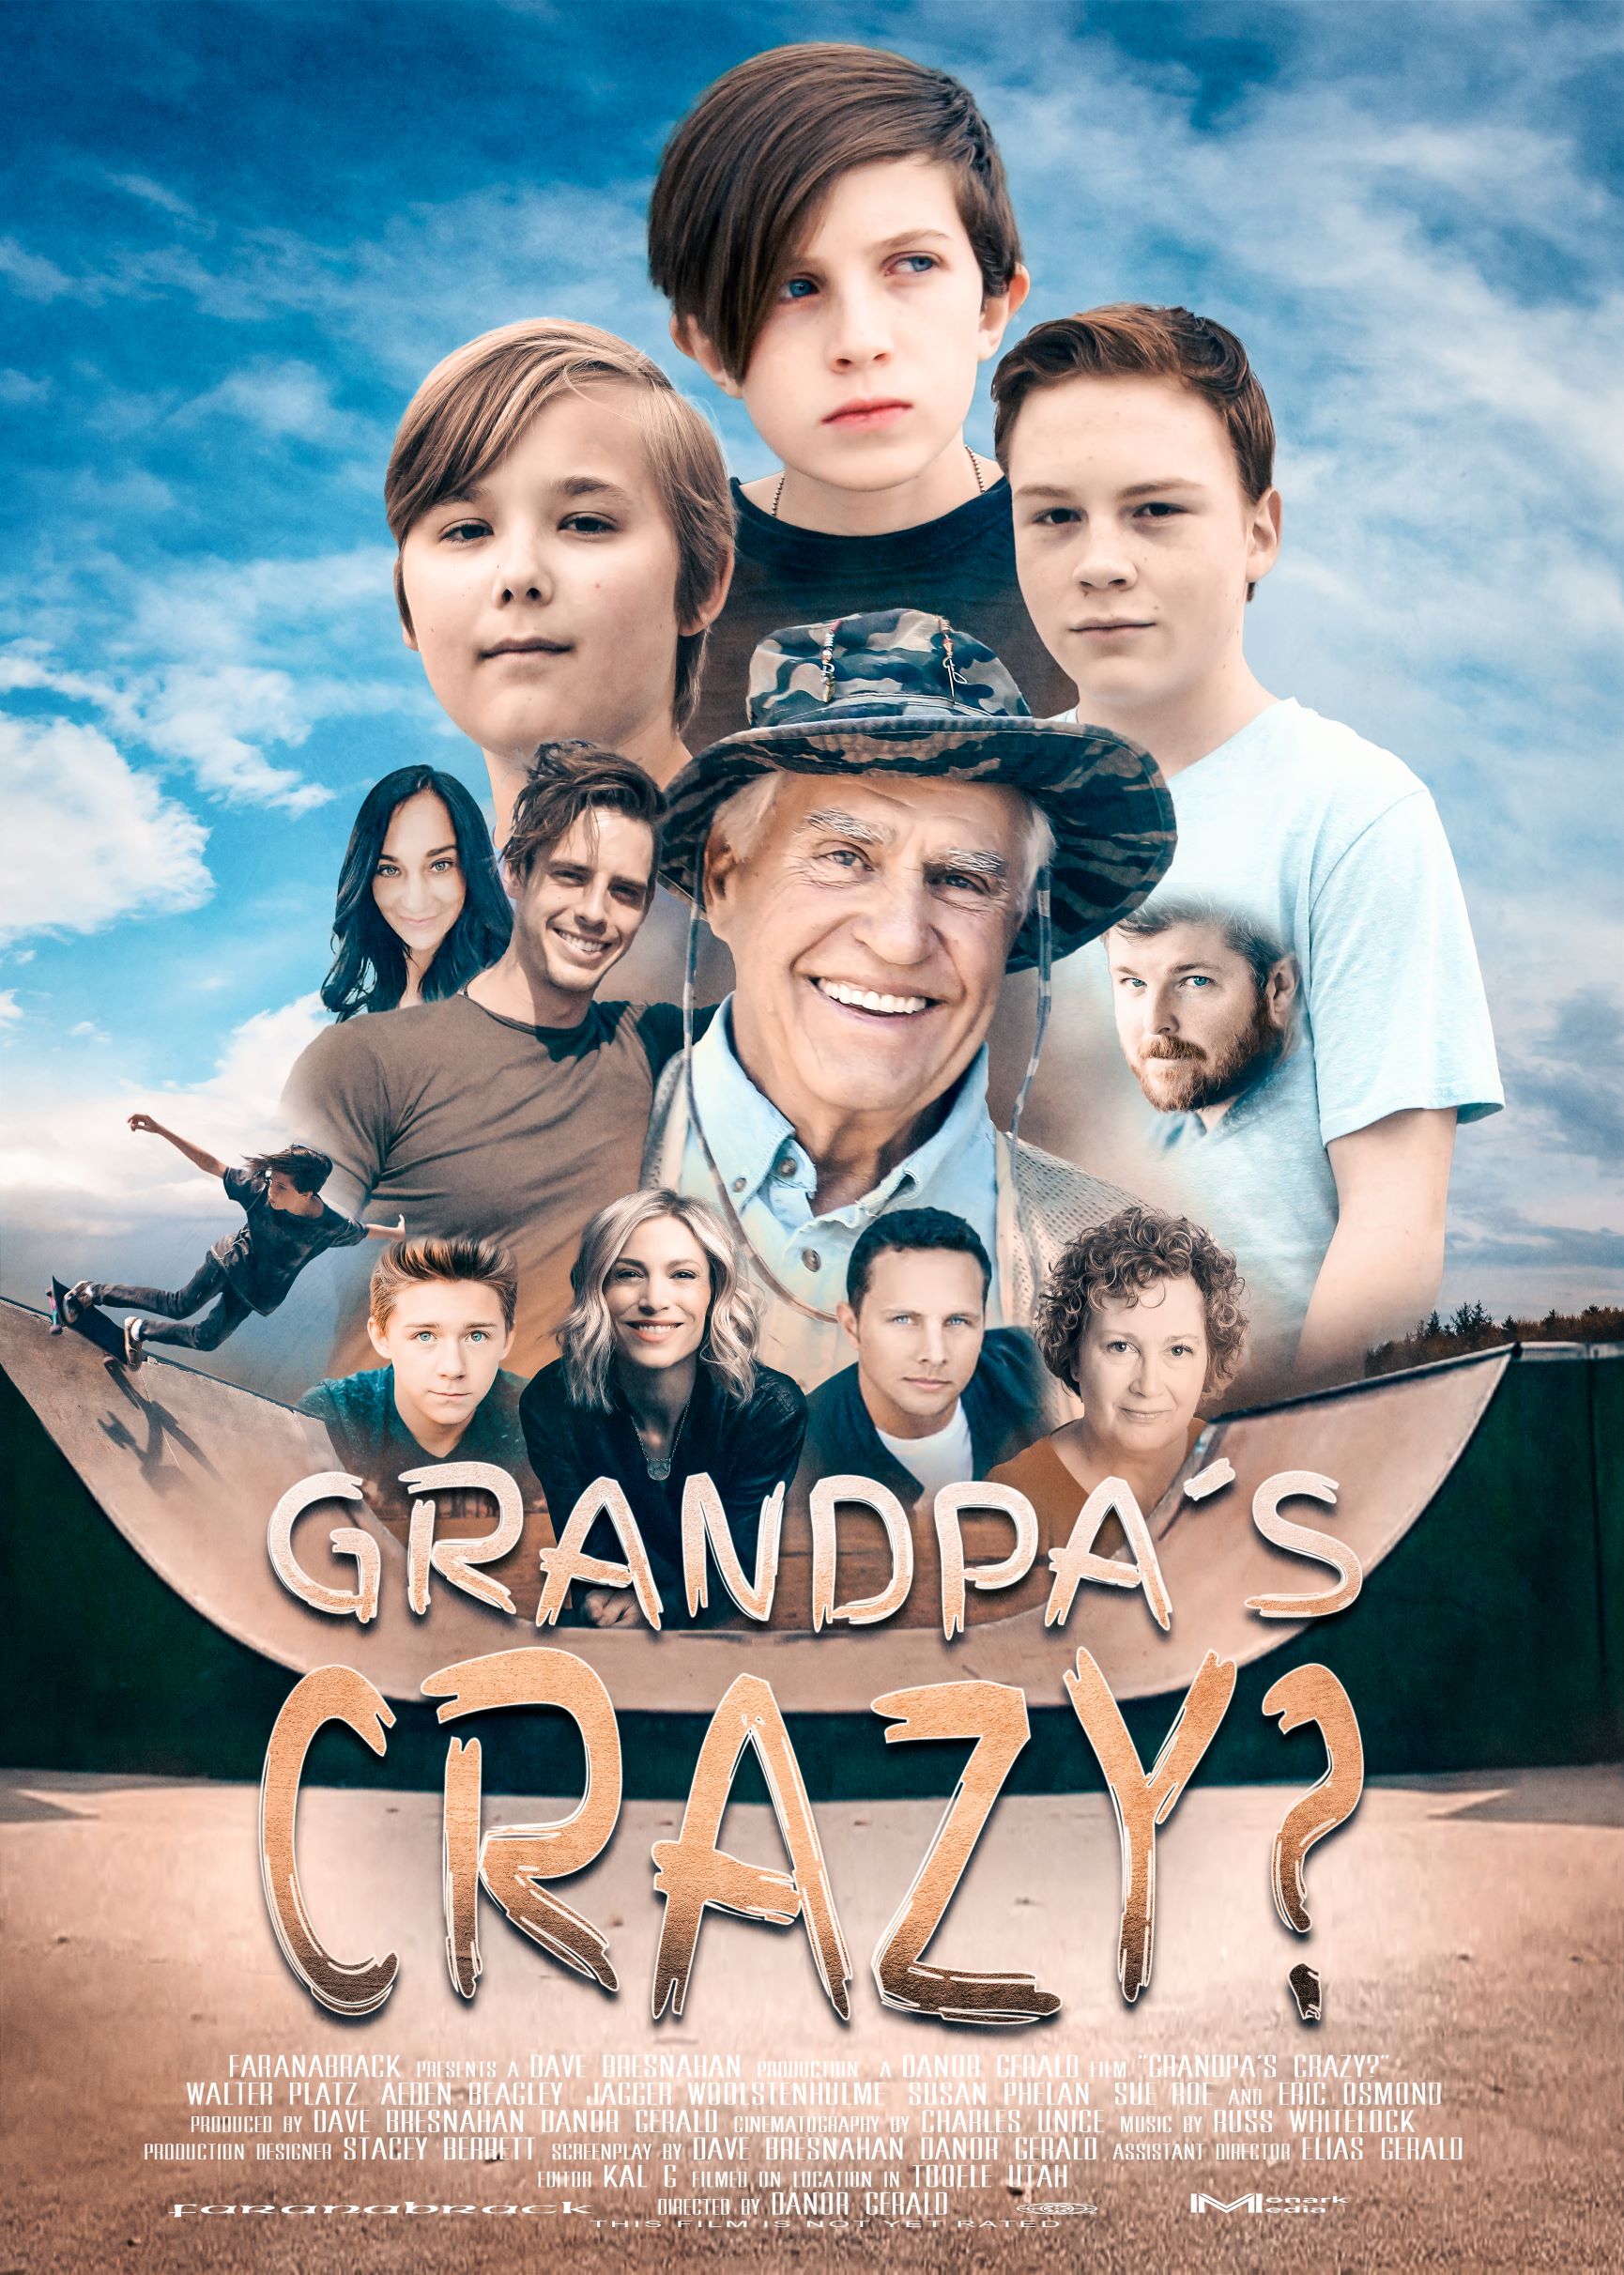 The made in Utah Movie ‘Grandpa’s Crazy?’ Gains Attention at Film Festivals